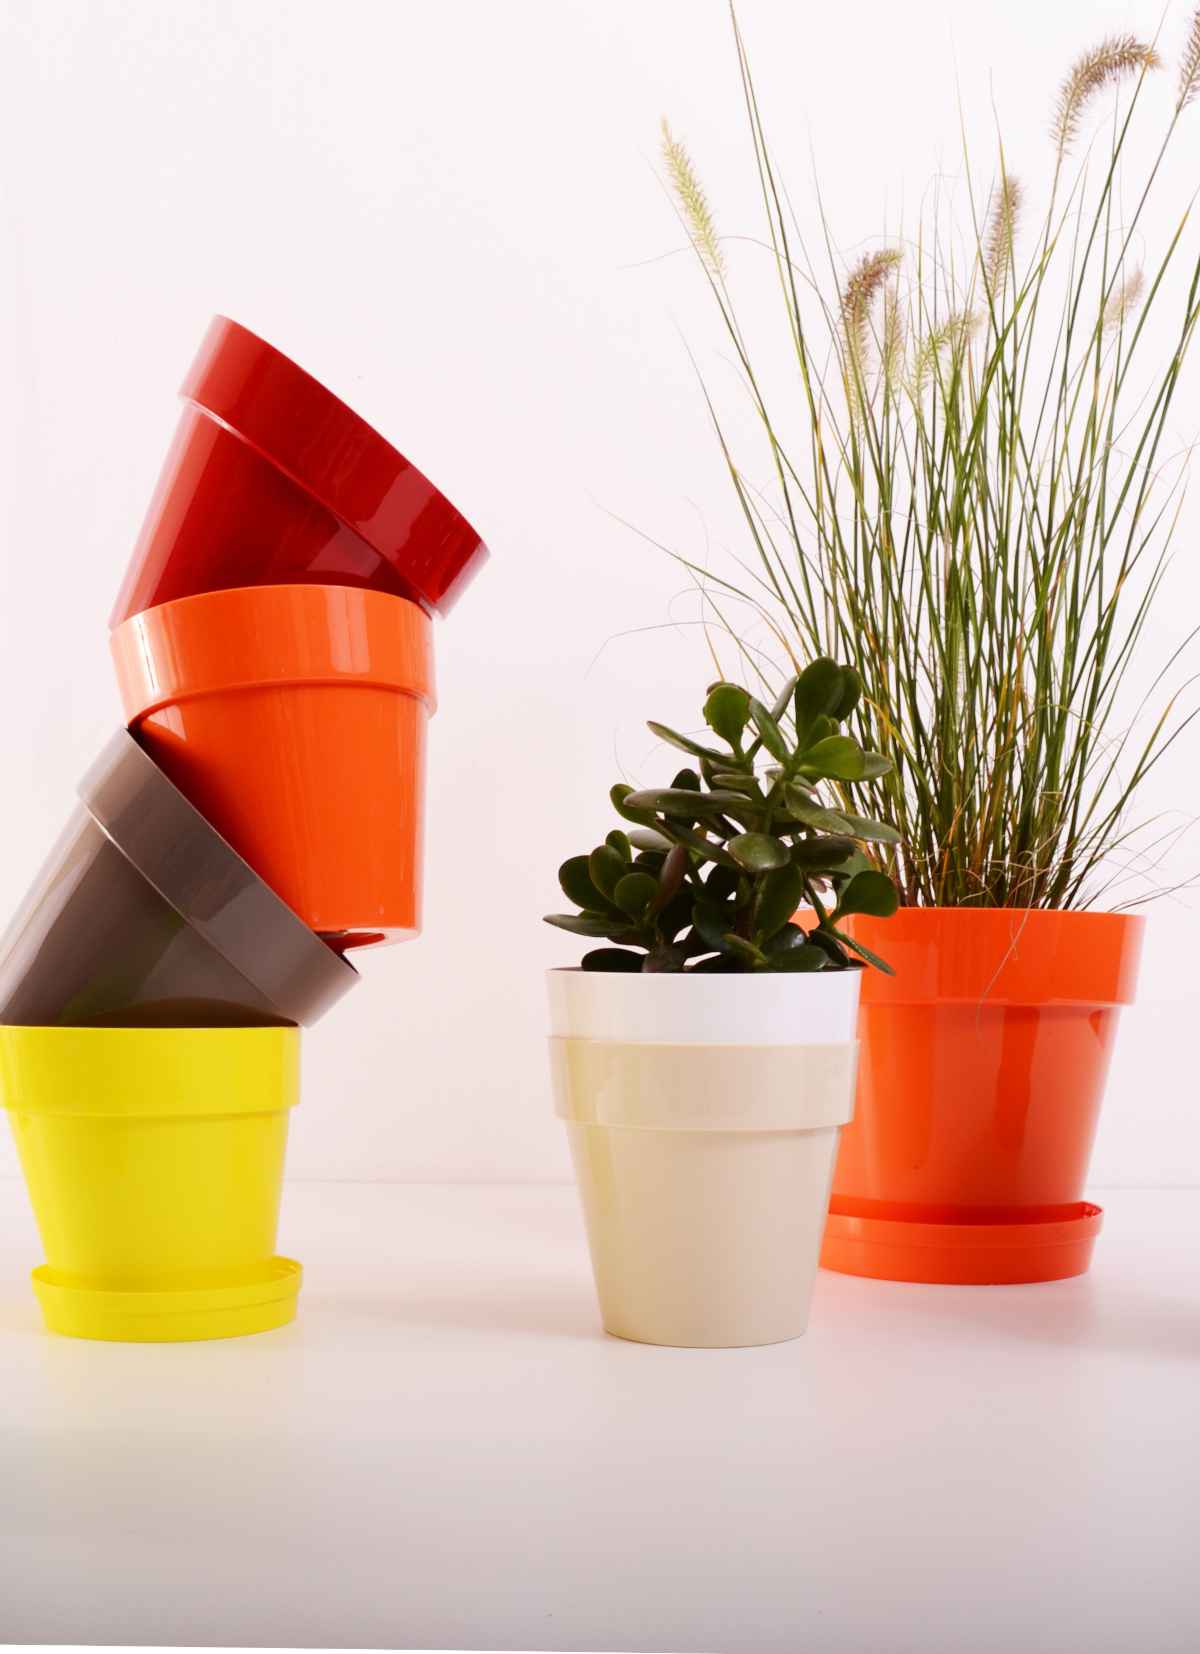 Plastic pots are affordable and don't get too hot